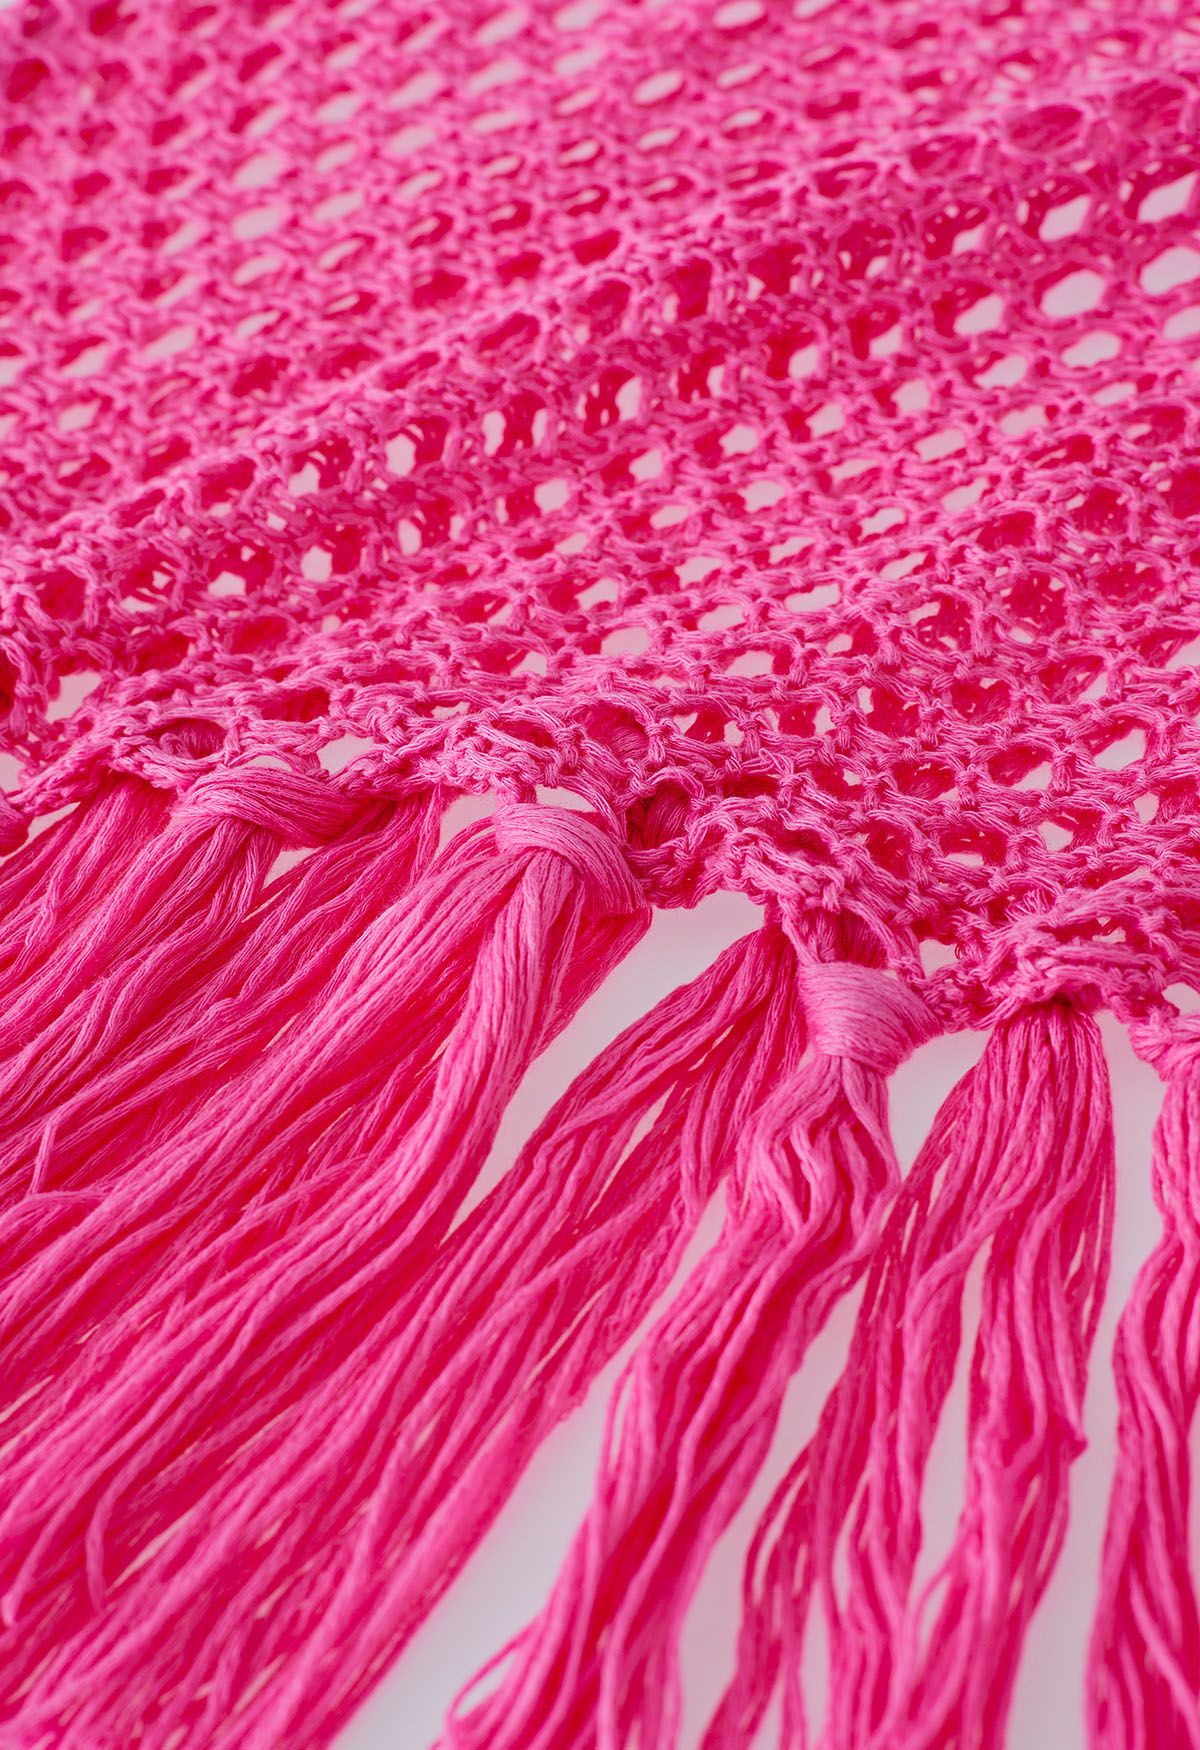 Tassel Hem Hollow Out Sleeveless Knit Cover Up in Hot Pink